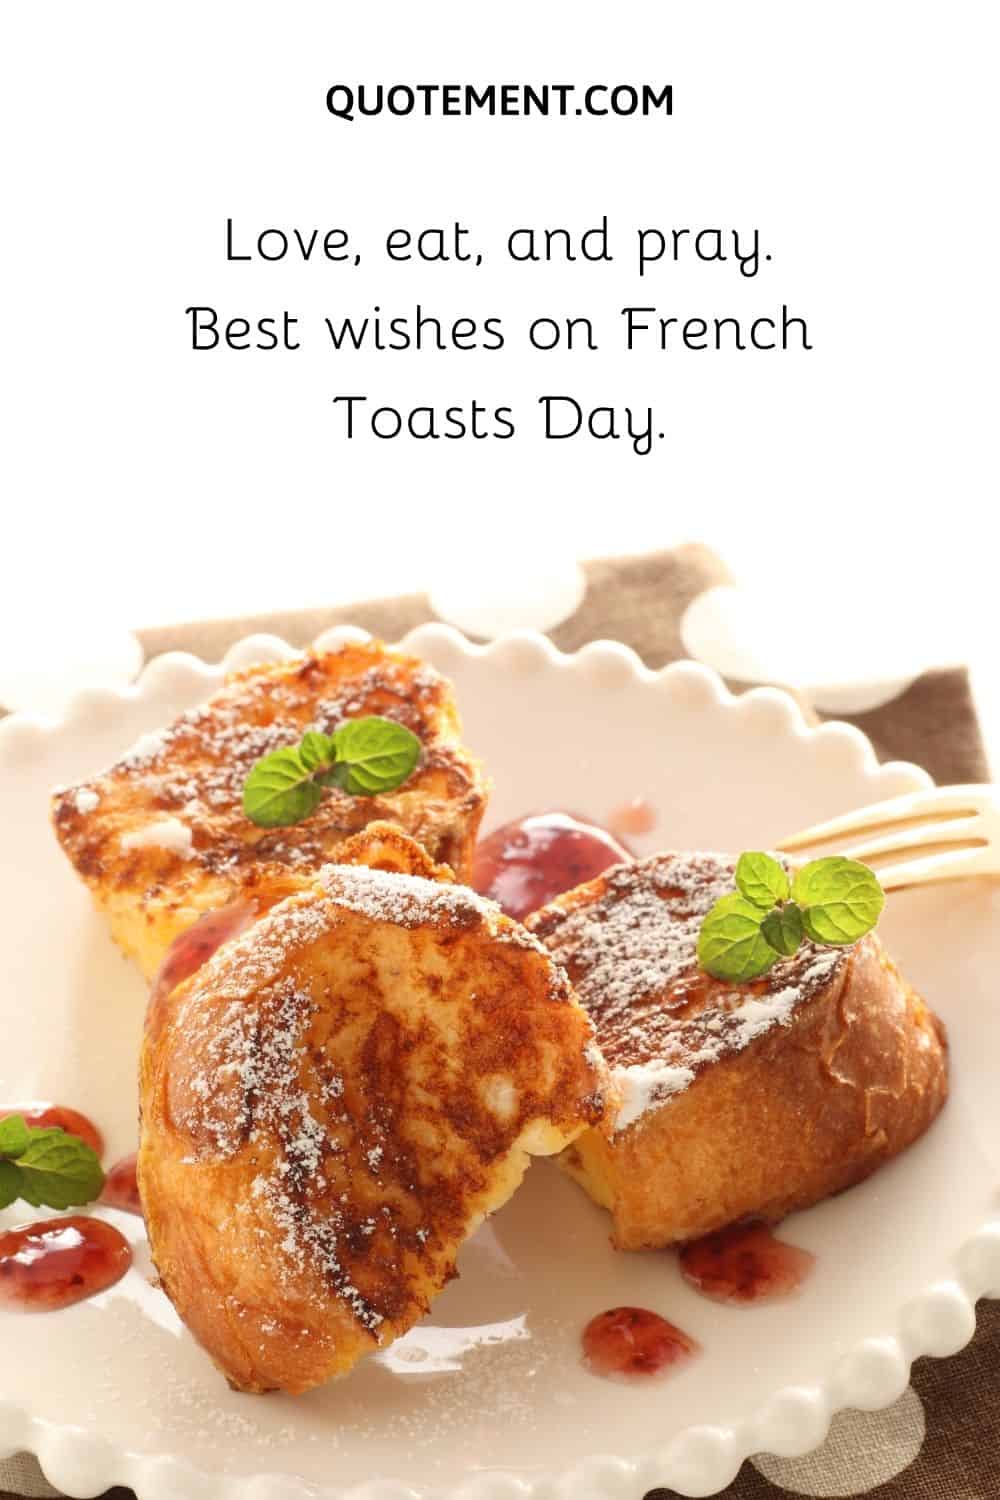 Best wishes on French Toasts Day